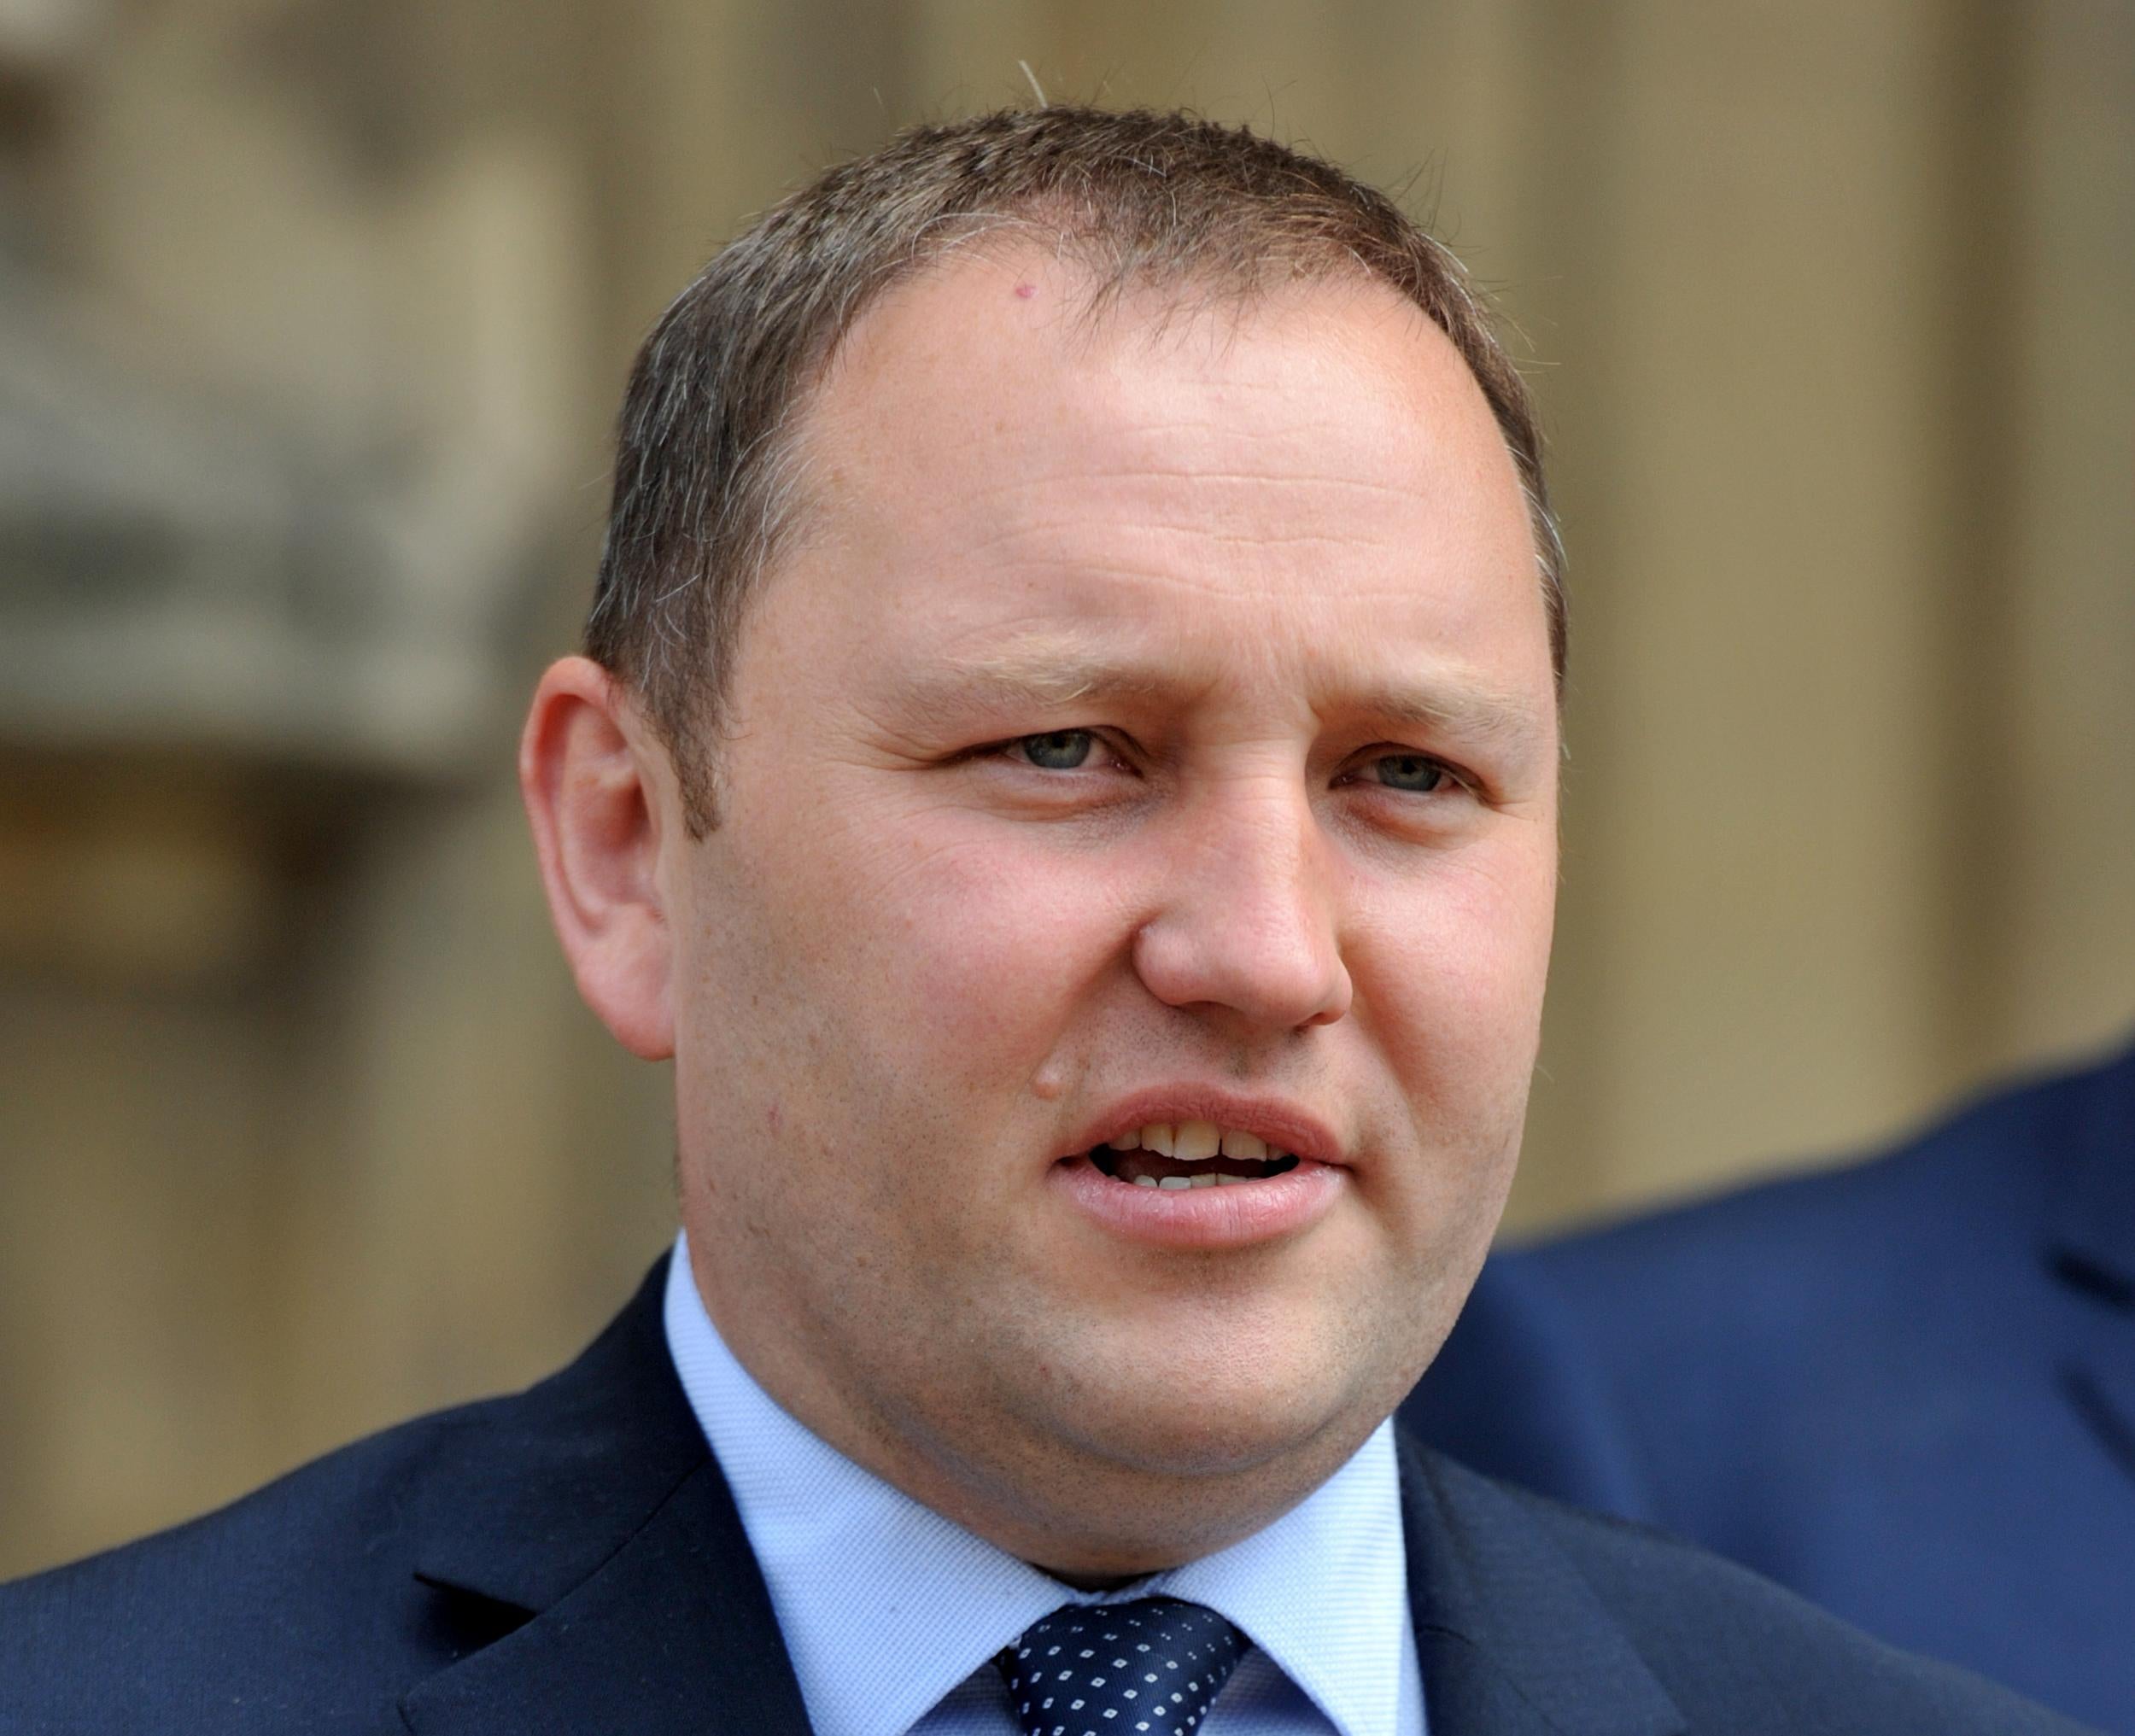 Ian Murray warned abstention could usher in a Tory Brexit